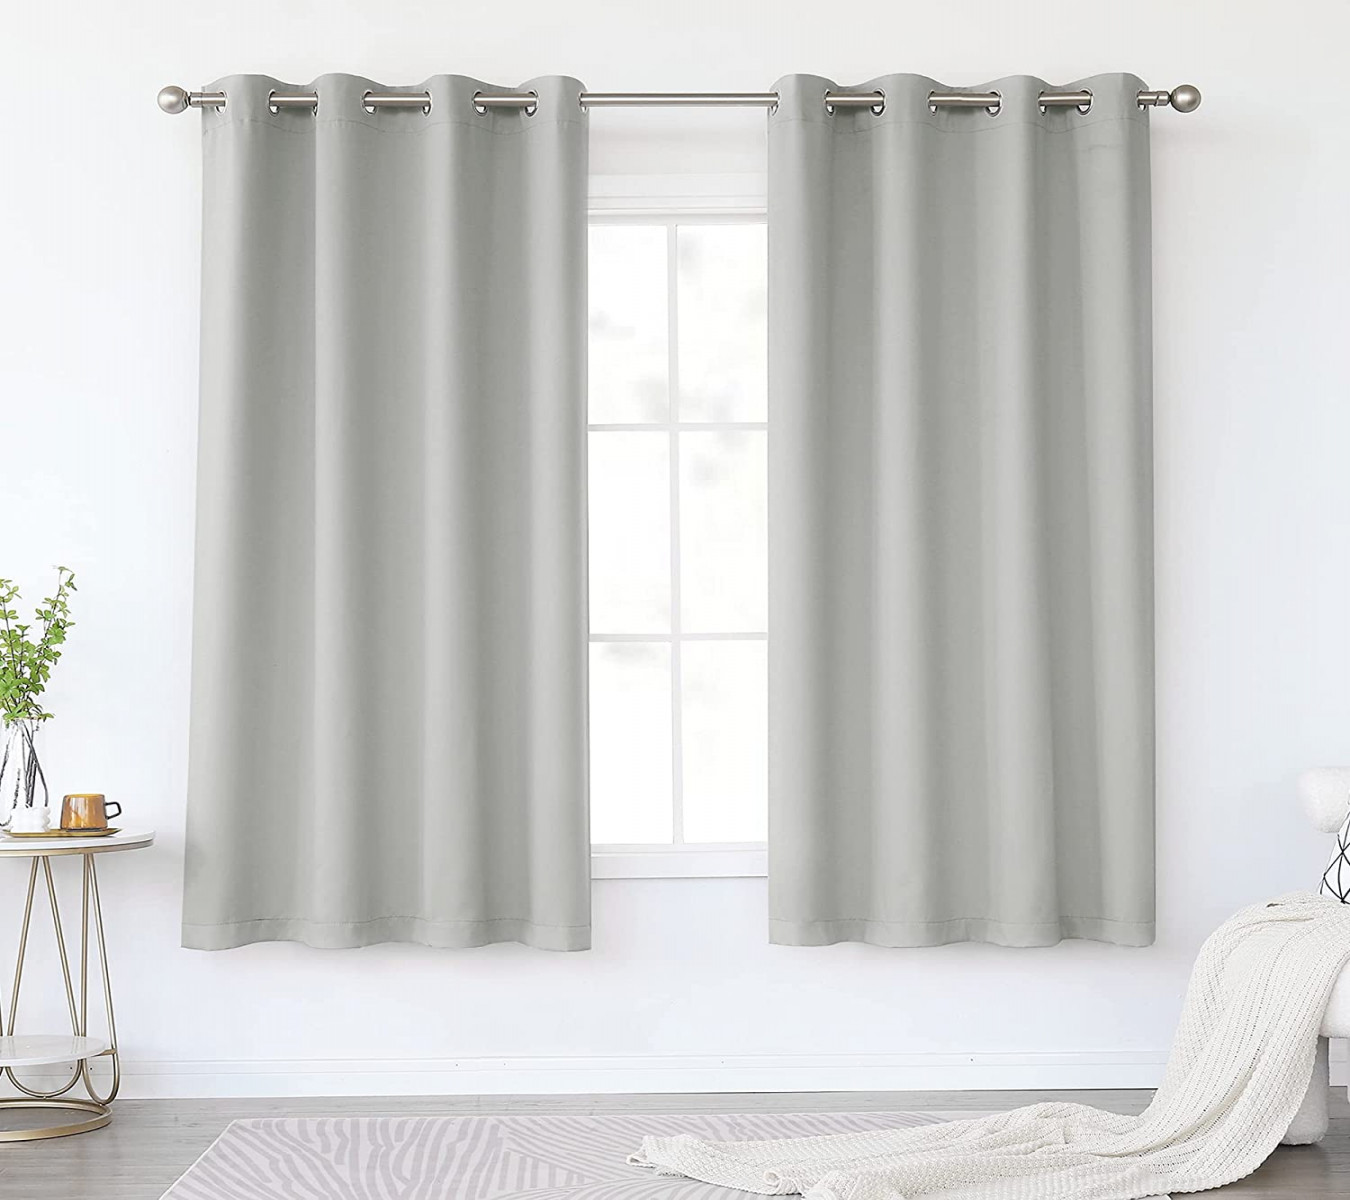 KEQIAOSUOCAI Light Grey Blackout Curtains Set Thermal Insulated Eyelet  Curtains for Bedroom Kitchen  Panels 5 x  Inch, Grey